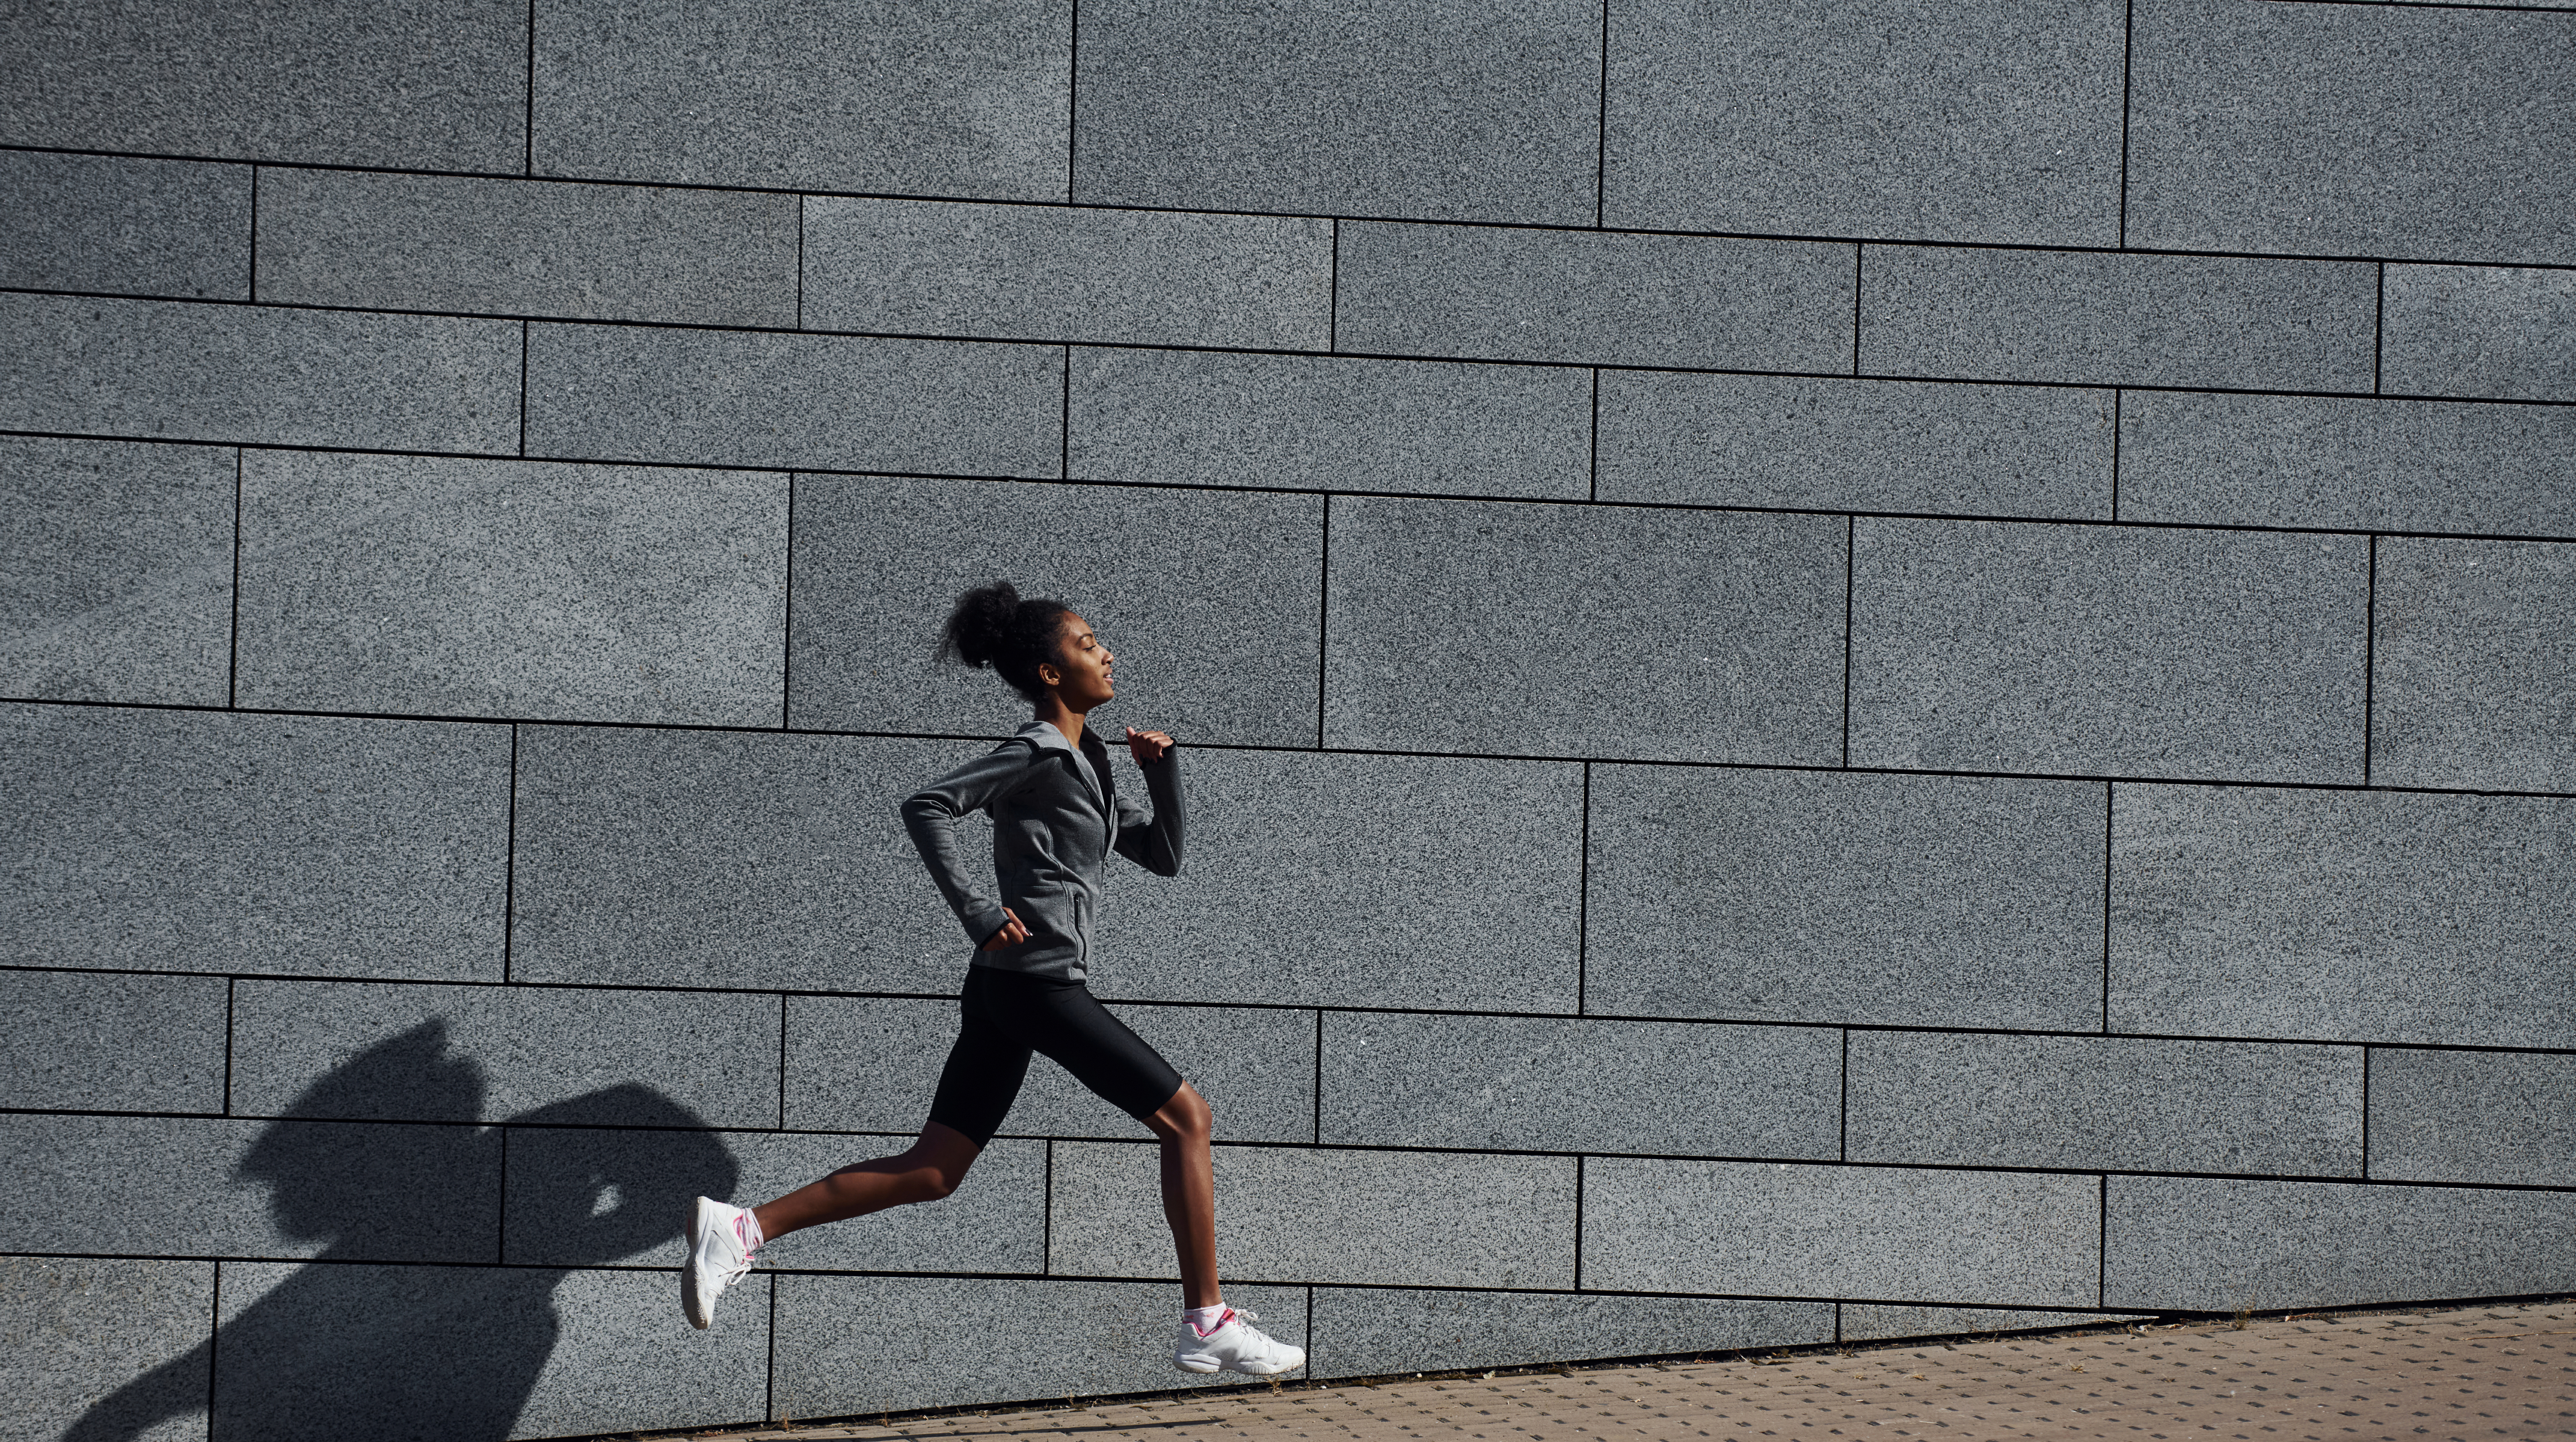 Urban running: a woman in athletic clothes sprints in an urban environment.